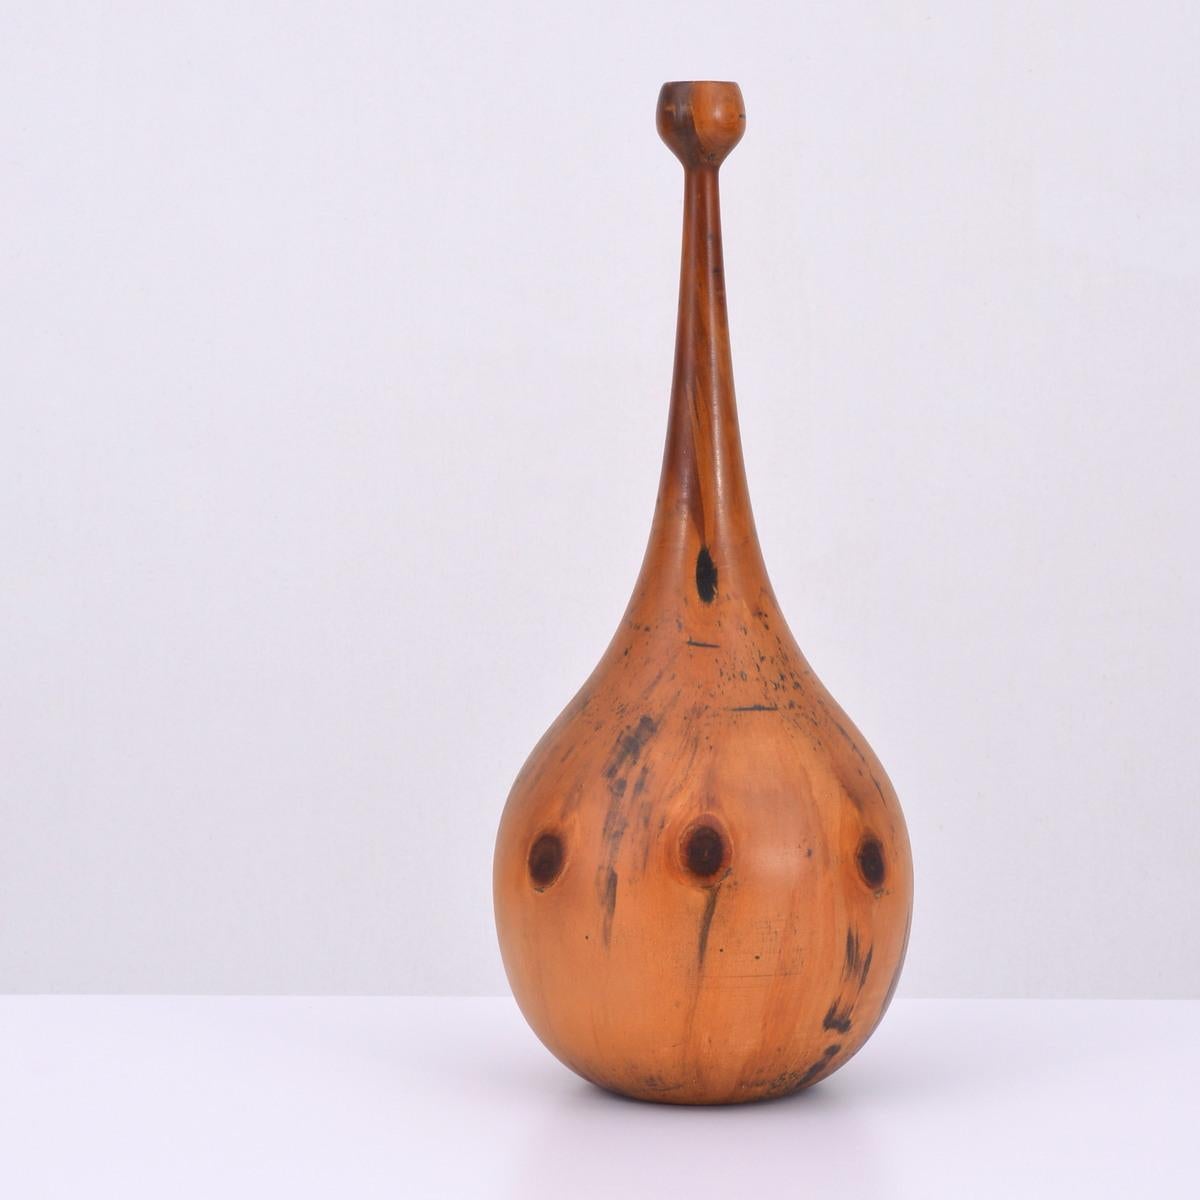 Artist/Designer: Ron Kent (American, 1931-2018), Myra Kent (American, 20th Century)

Additional Information: Ron and Myra Kent were American woodturners known for beautifully crafted wooden vessels.

Marking(s); notes: signed

Country of origin;